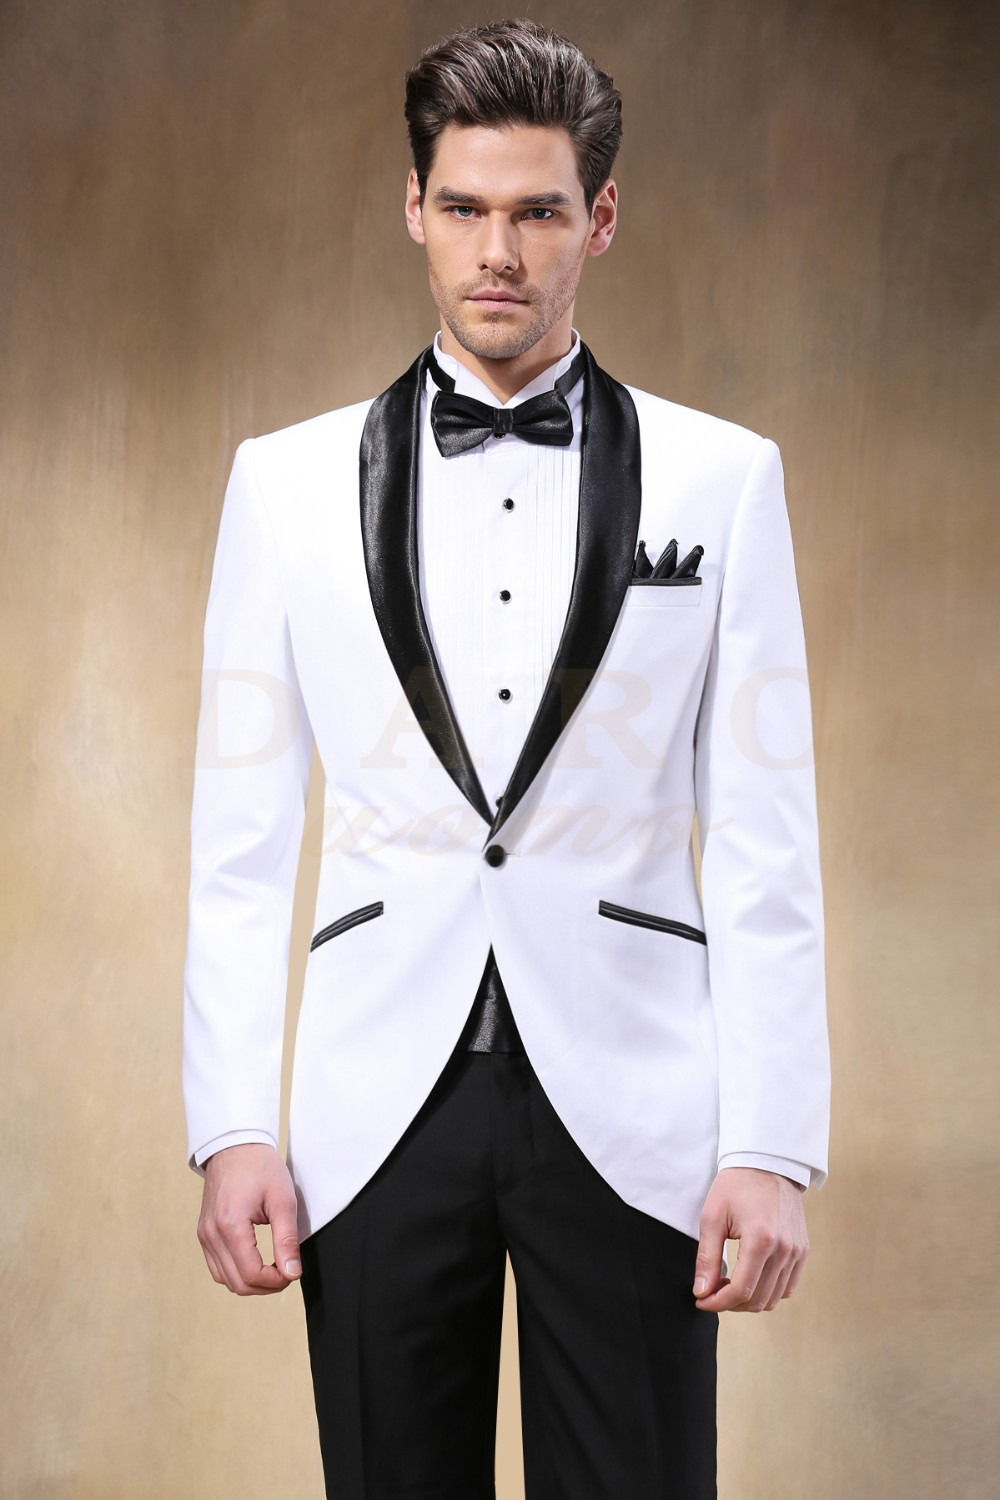 tips to buy white suits for men odgxvrb